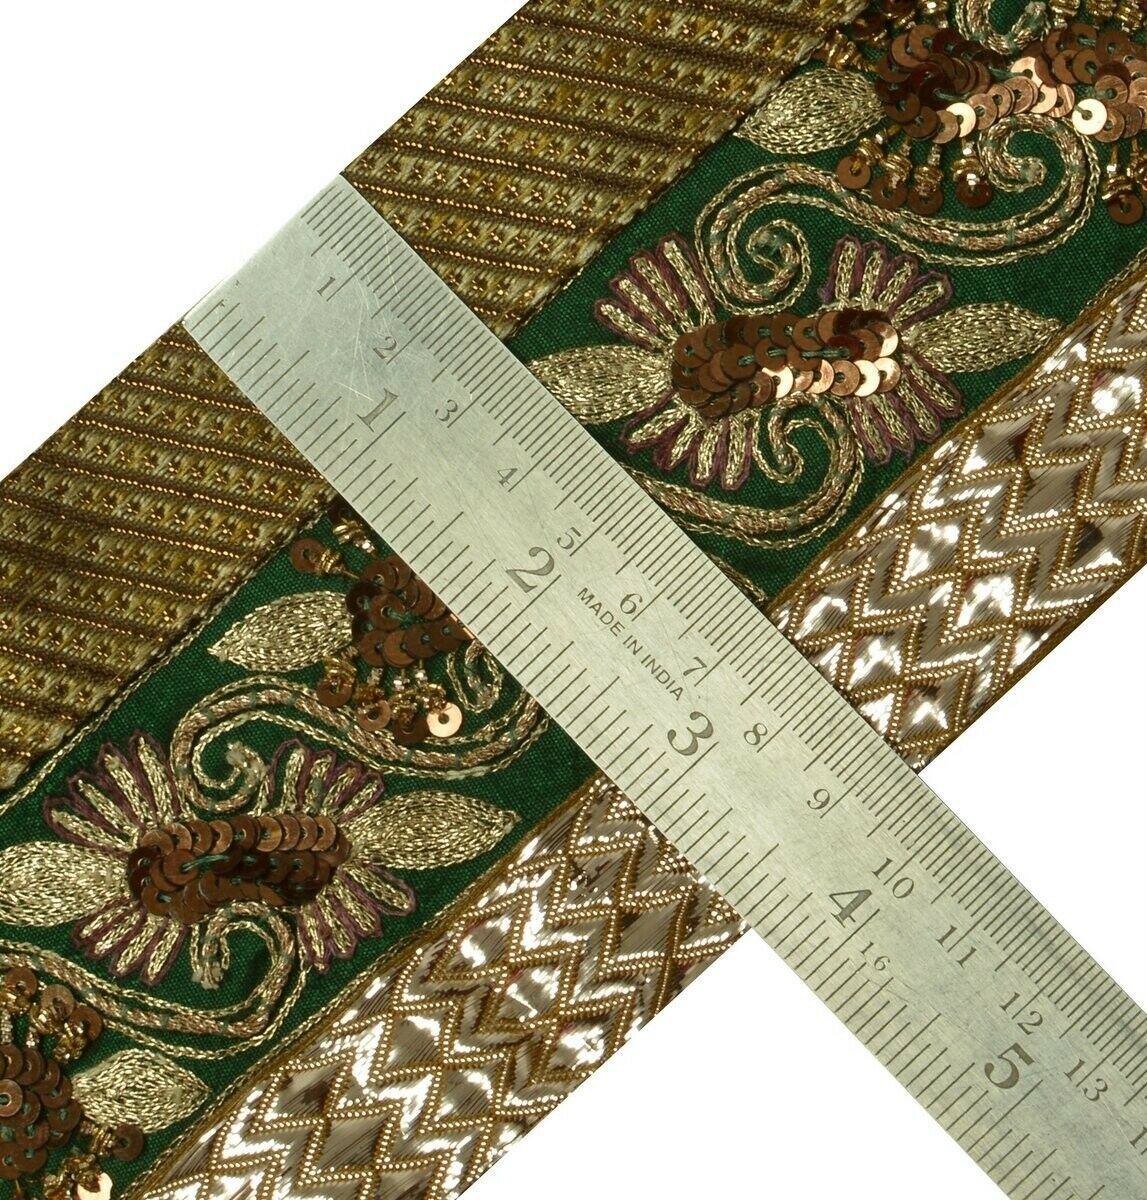 Vintage Sari Border Indian Craft Trim Hand Beaded Embroidered Patch Work Lace